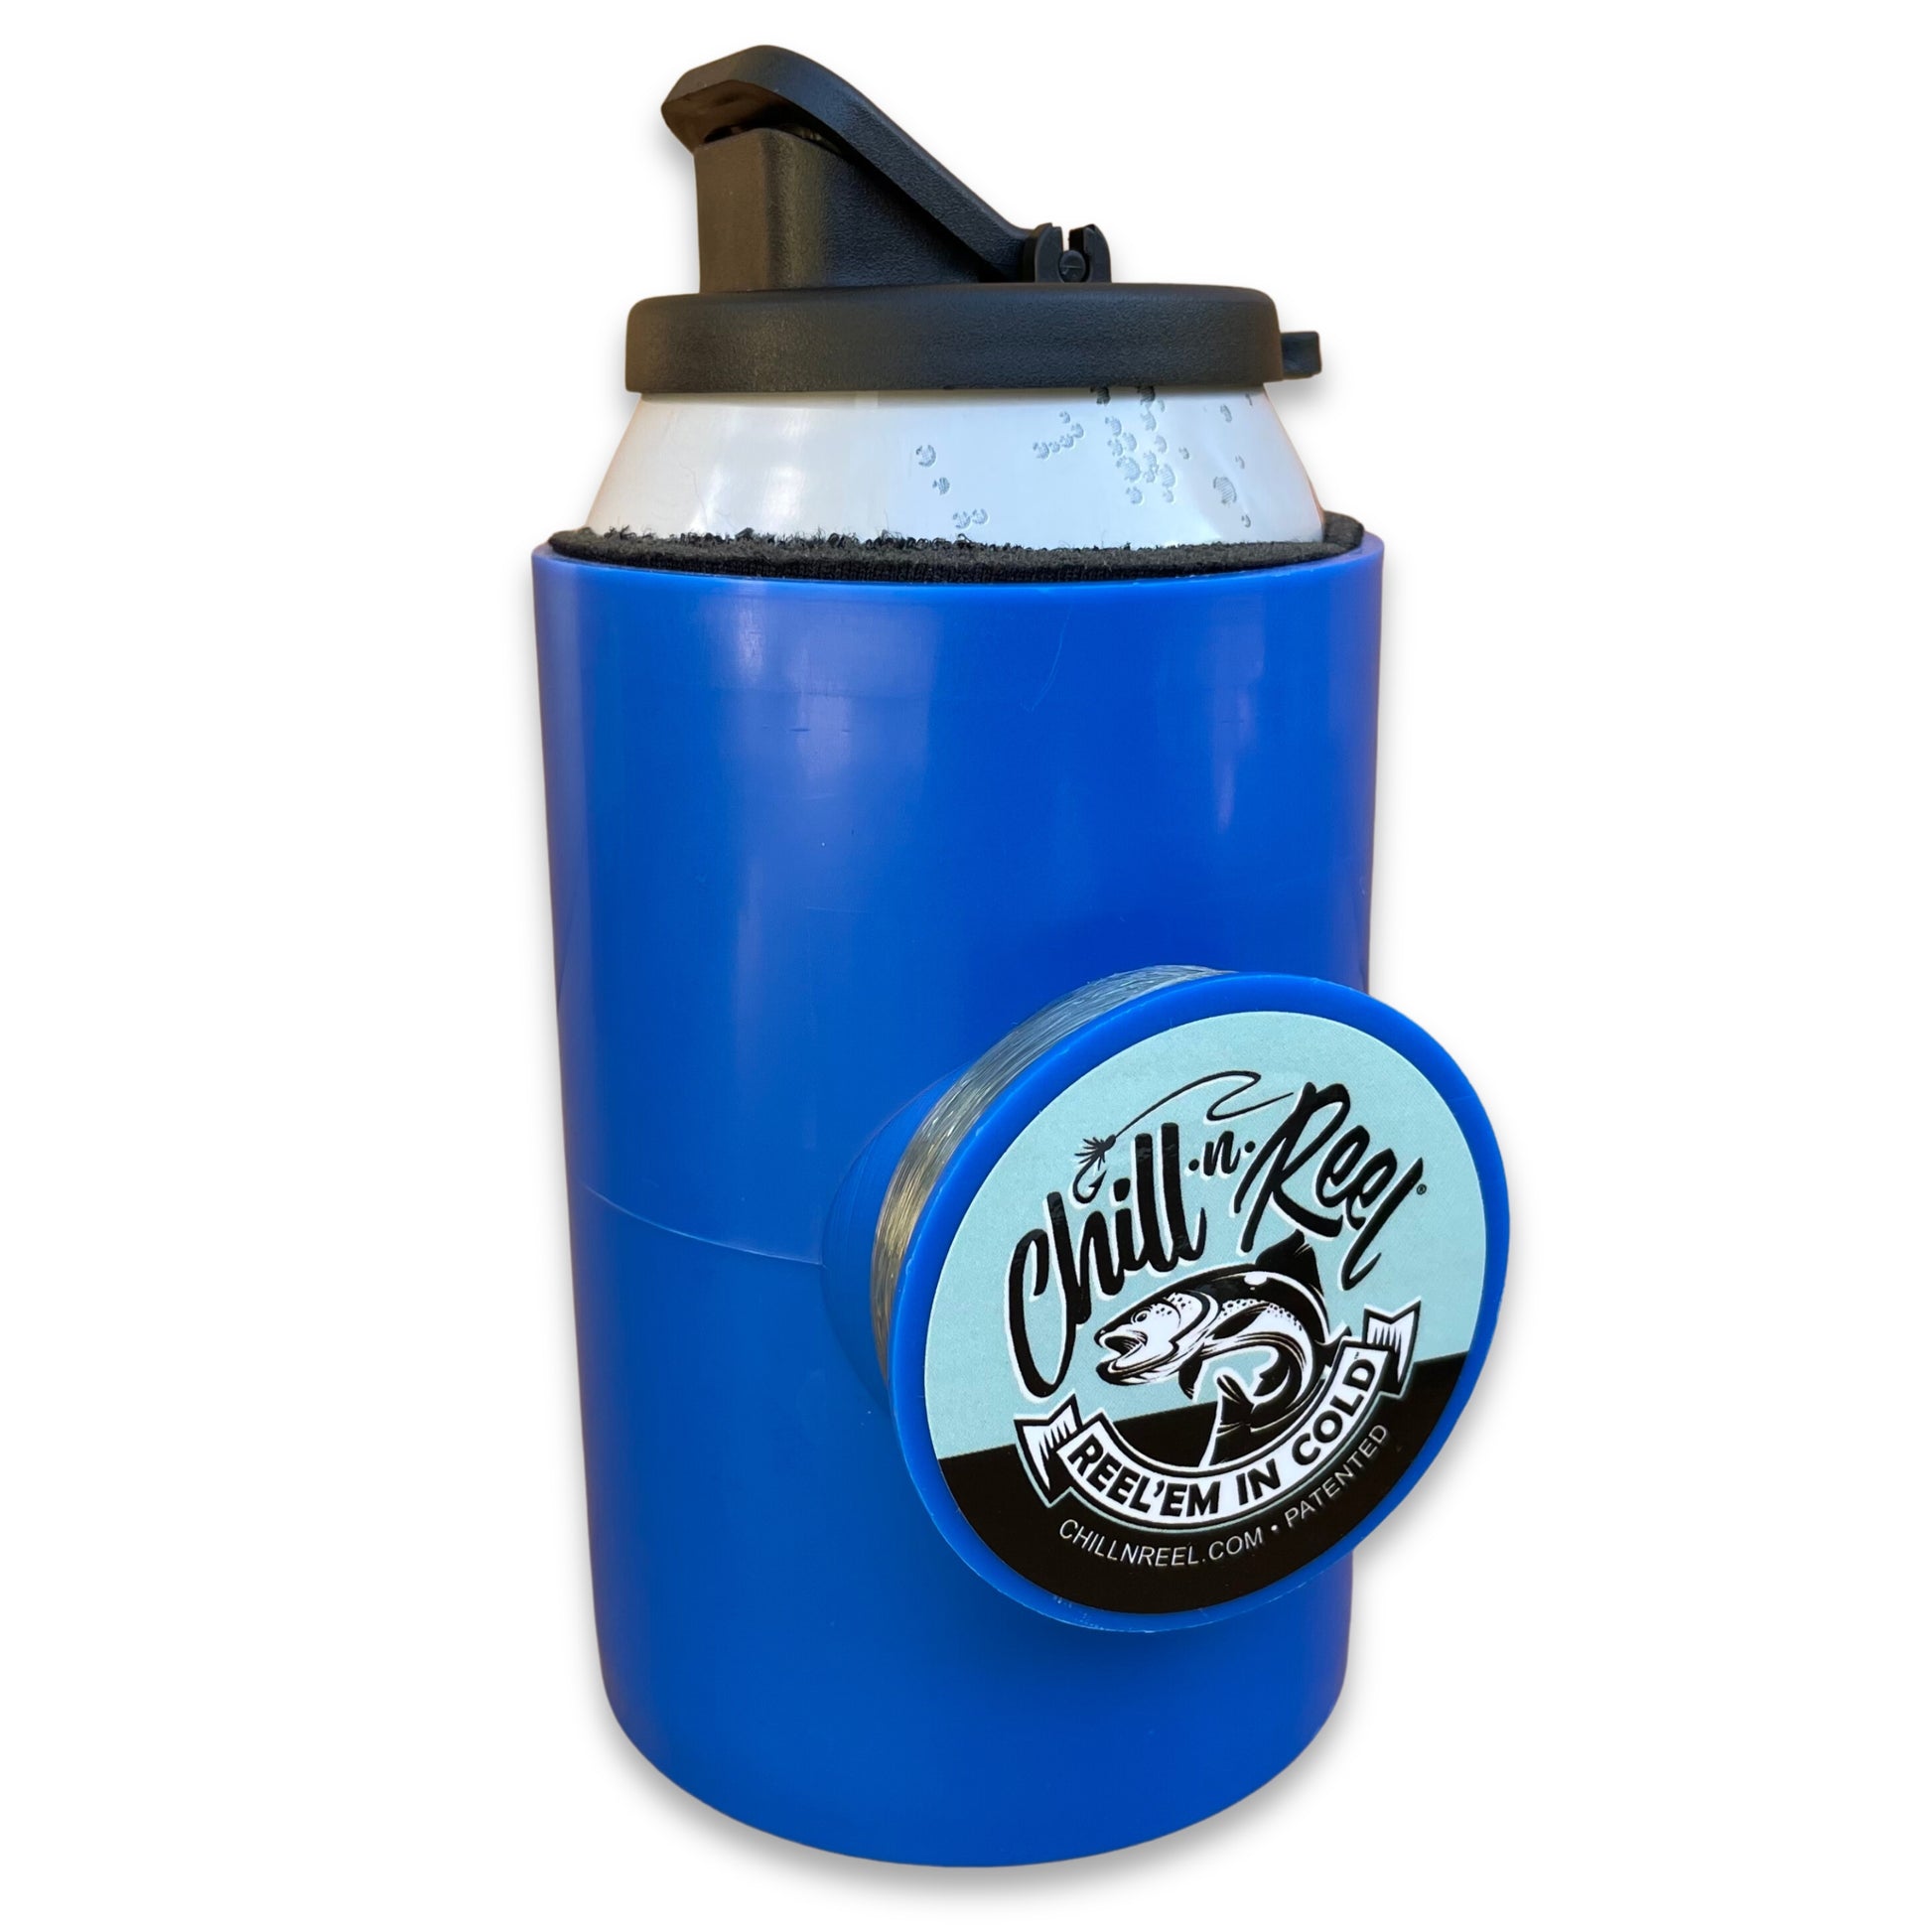 Chill-N-Reel Fishing Can Cooler With Hand Line Reel A Attached Holder  Hard-Shell To Drink N1B2